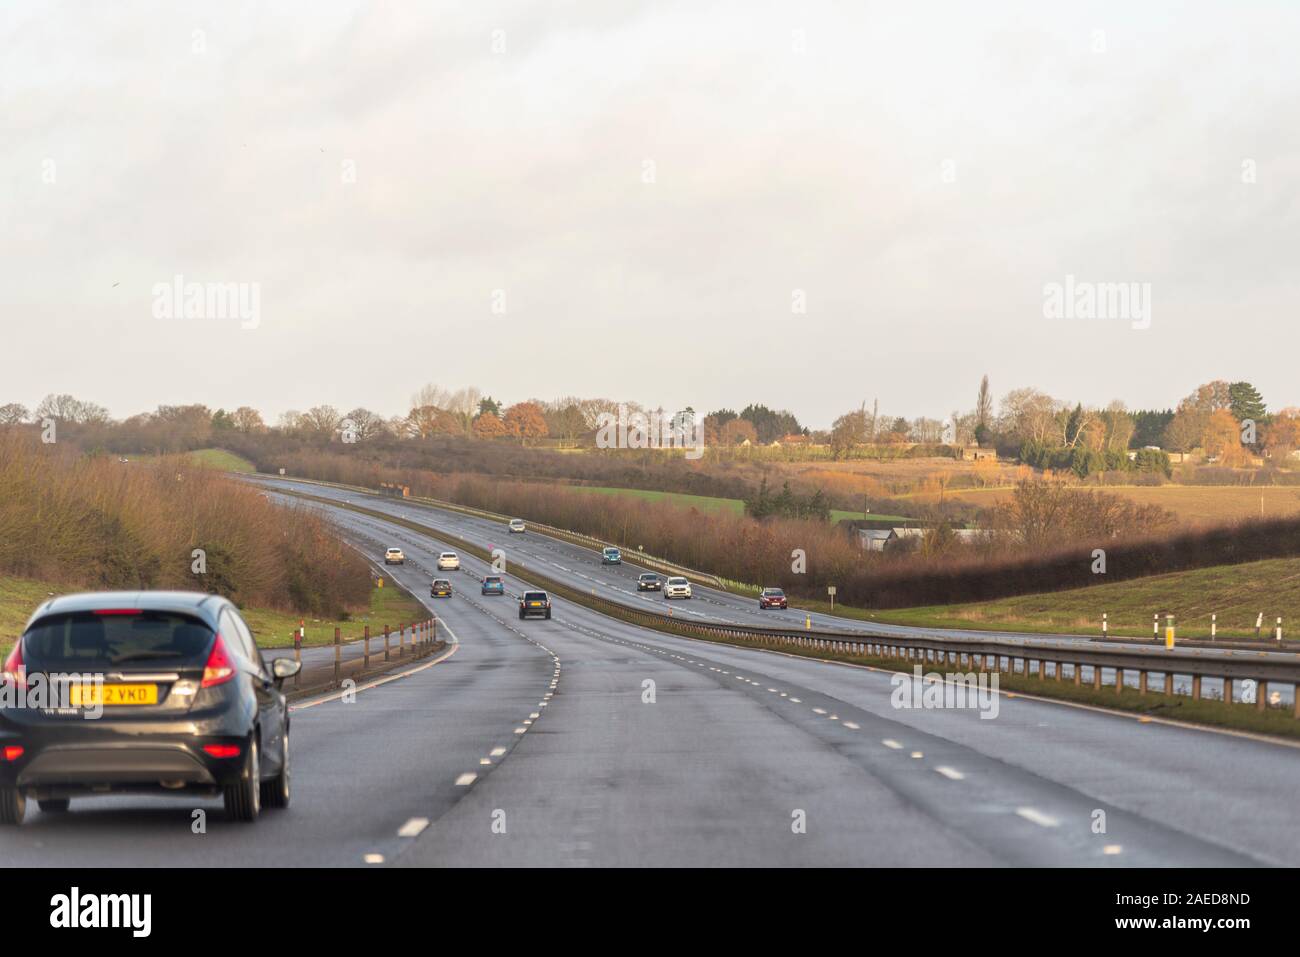 Vehicles driving on a stretch of A130 three lane carriageway with Rettendon on horizon with dip in the road near Runwell, Essex, UK. Damp winter drive Stock Photo